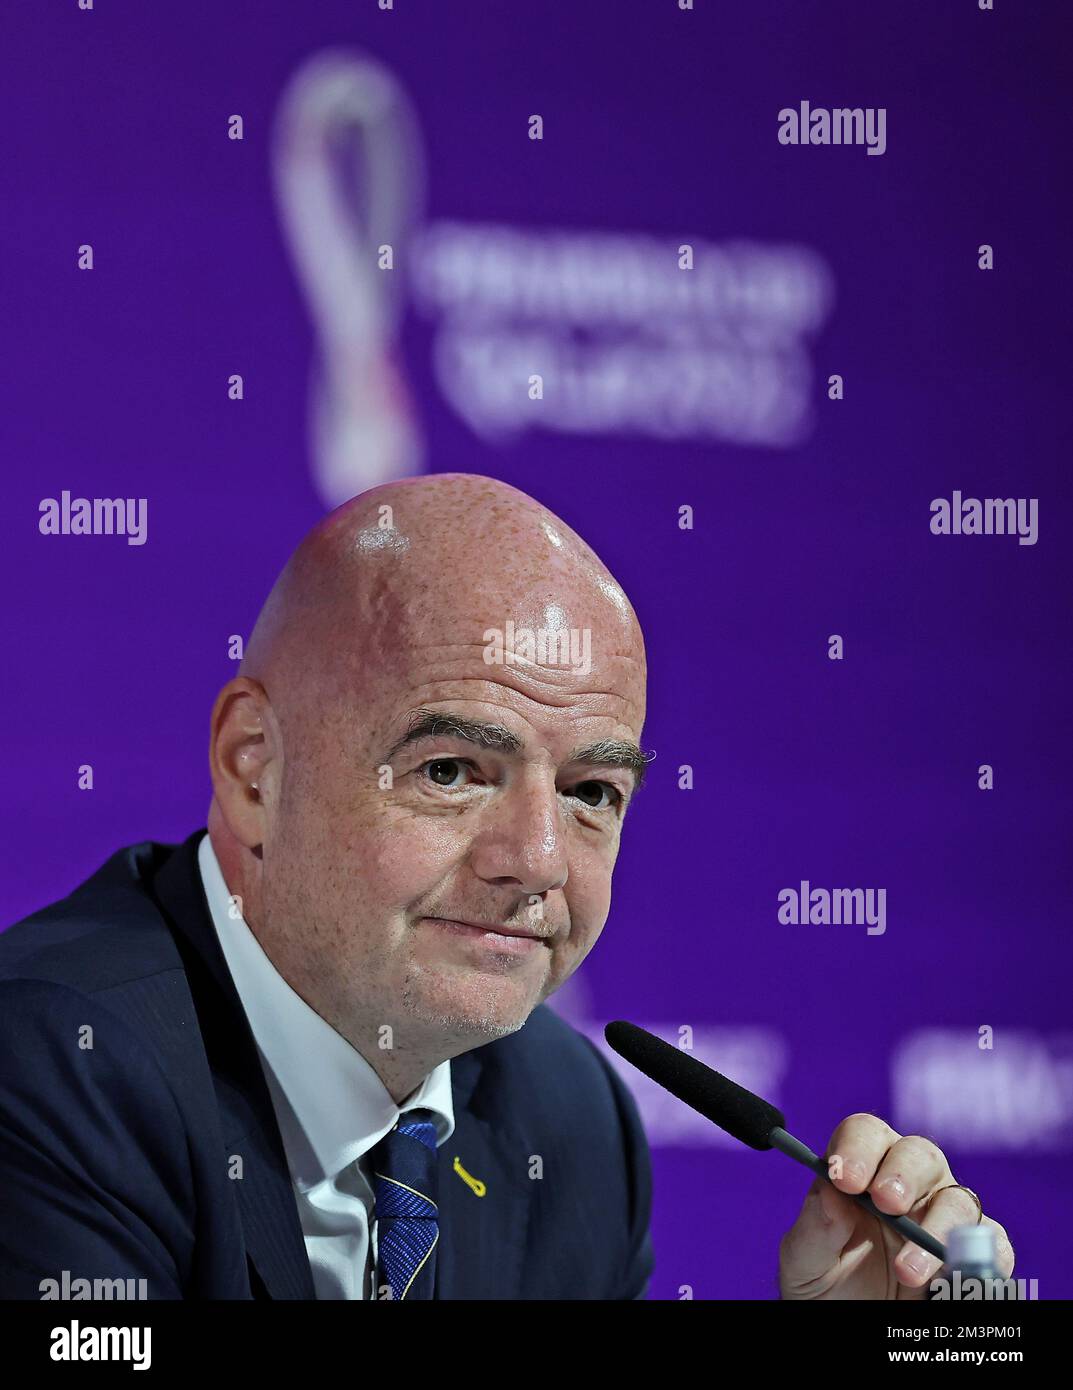 Doha, Qatar. 16th Dec, 2022. 2022 FIFA World Cup Press Conference before  Final Games Dec 16th. Gianni Infantino, President of FIFA speaking to the  press Credit: Action Plus Sports Images/Alamy Live News